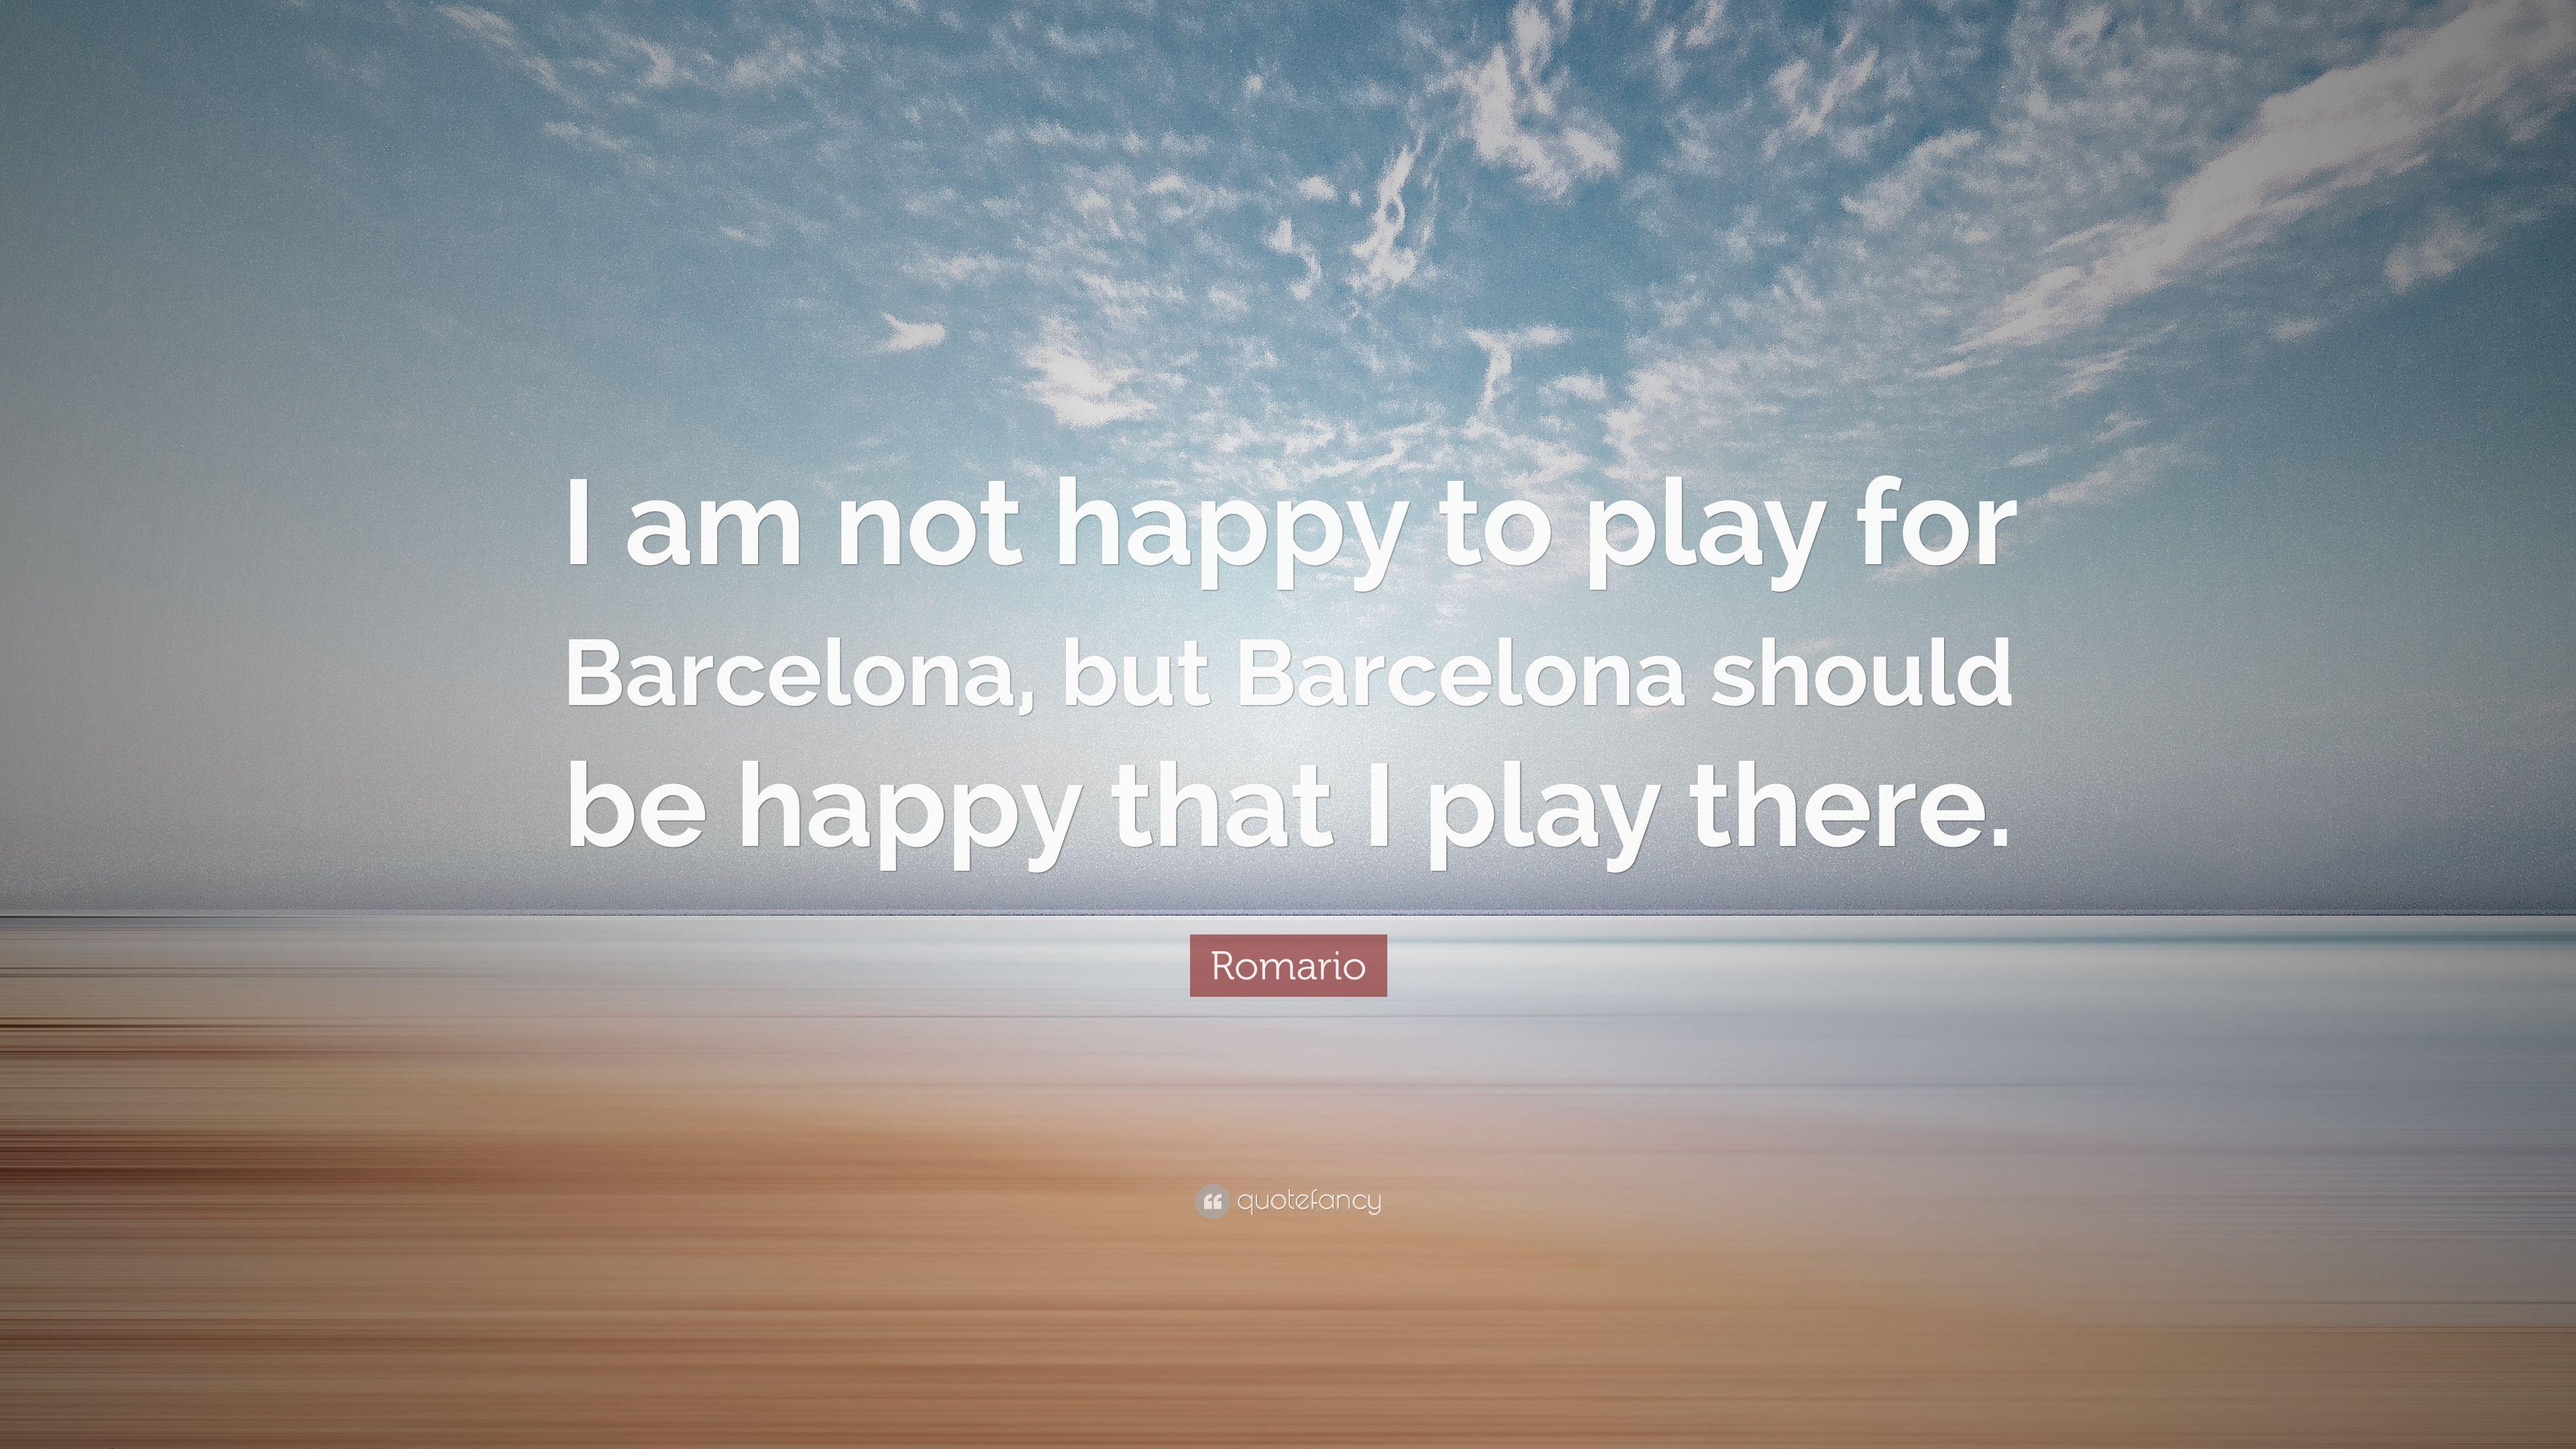 Romario Quote: “I am not happy to play for Barcelona, but Barcelona